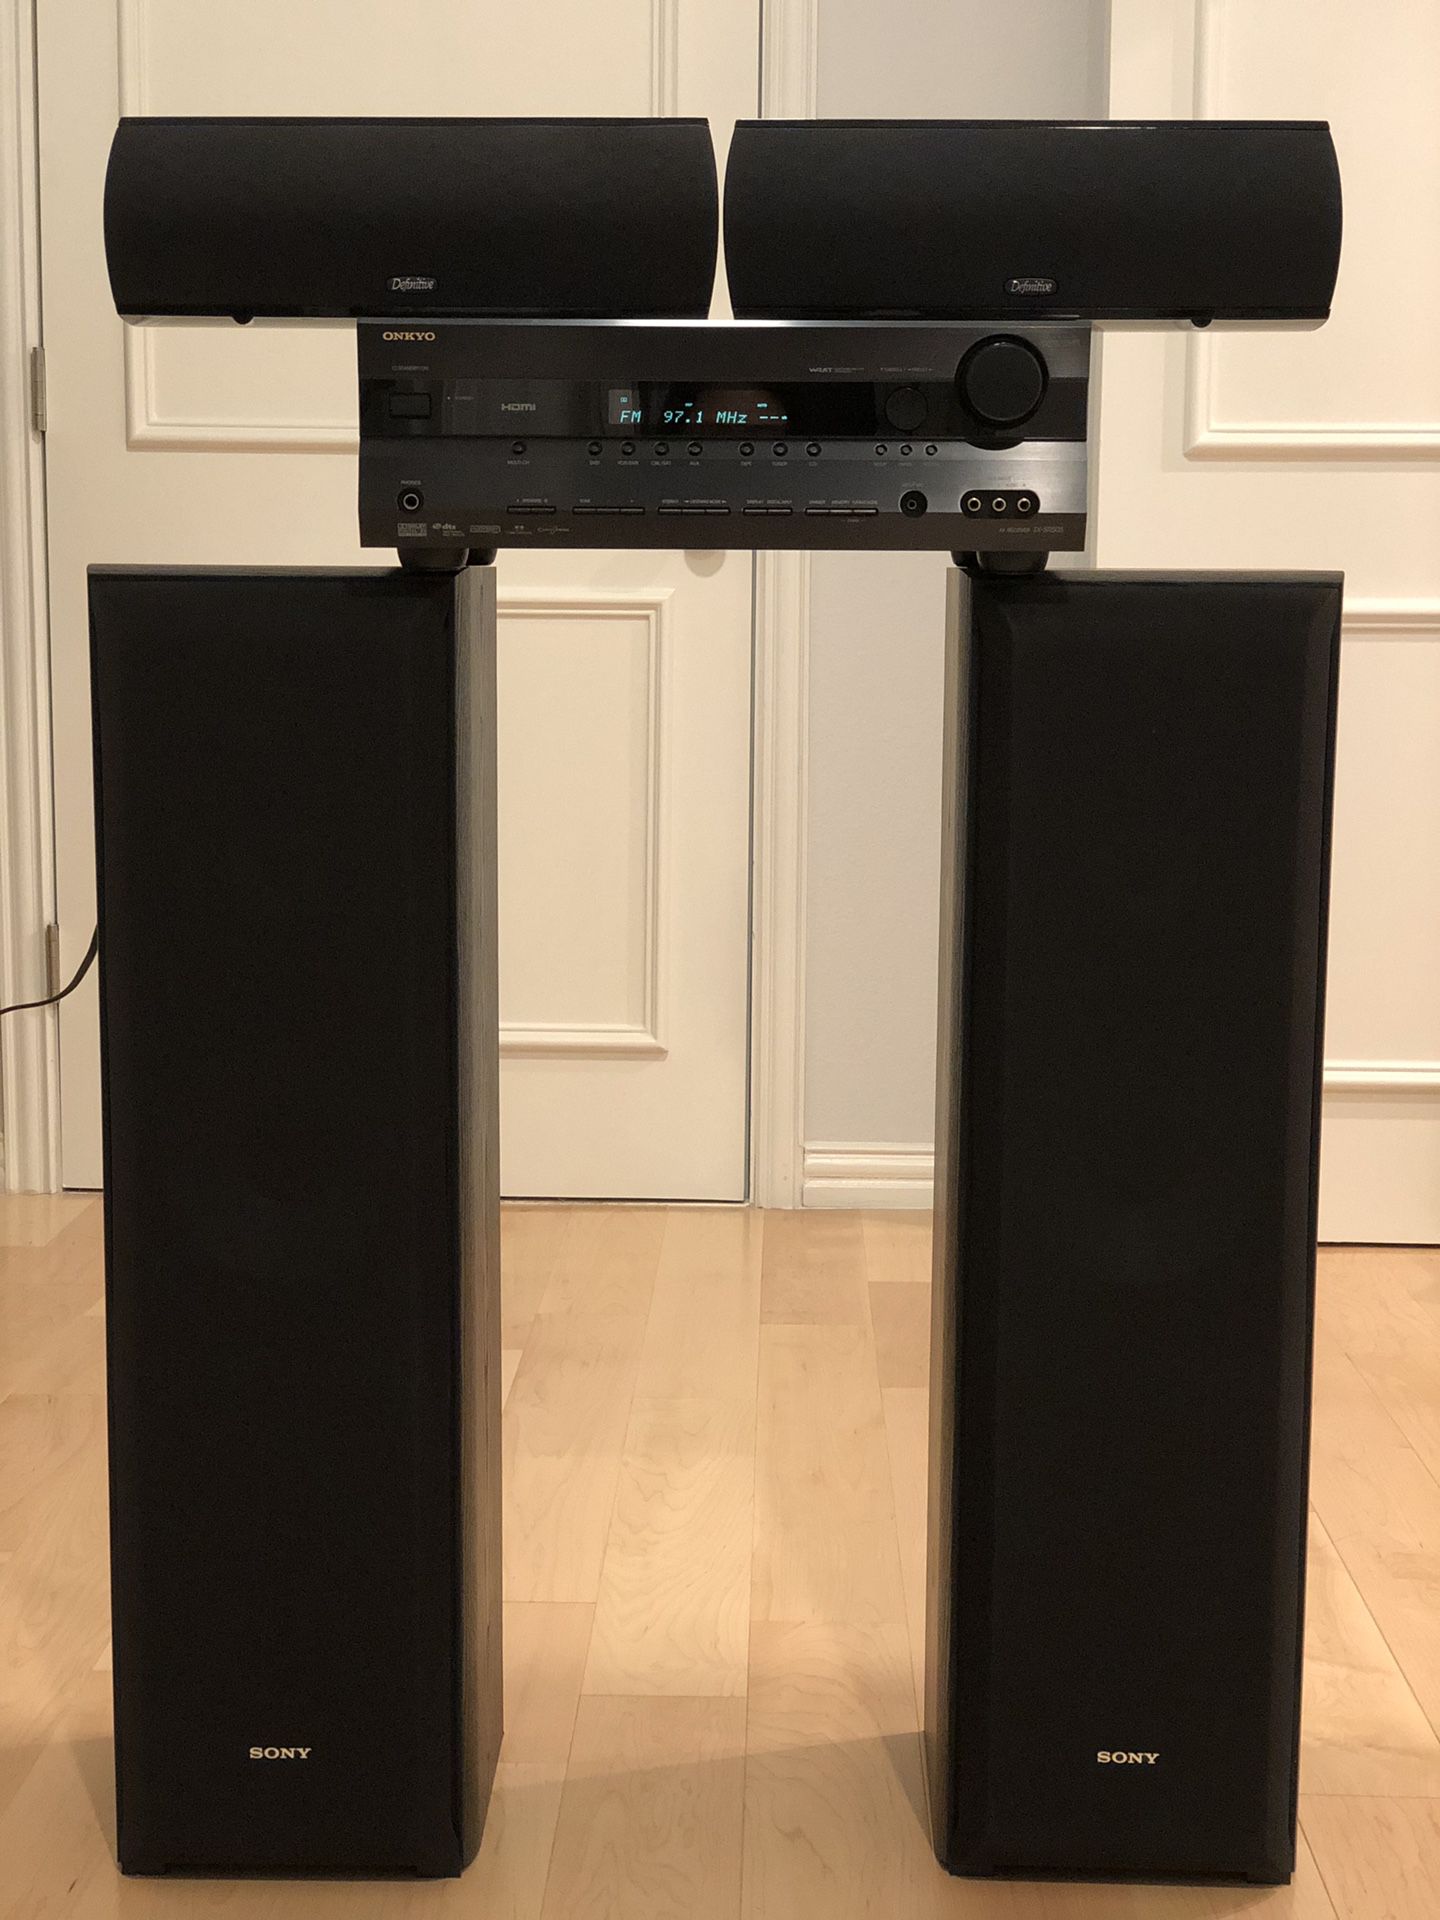 Onkyo 7.1 A/V Receiver with 4 speakers